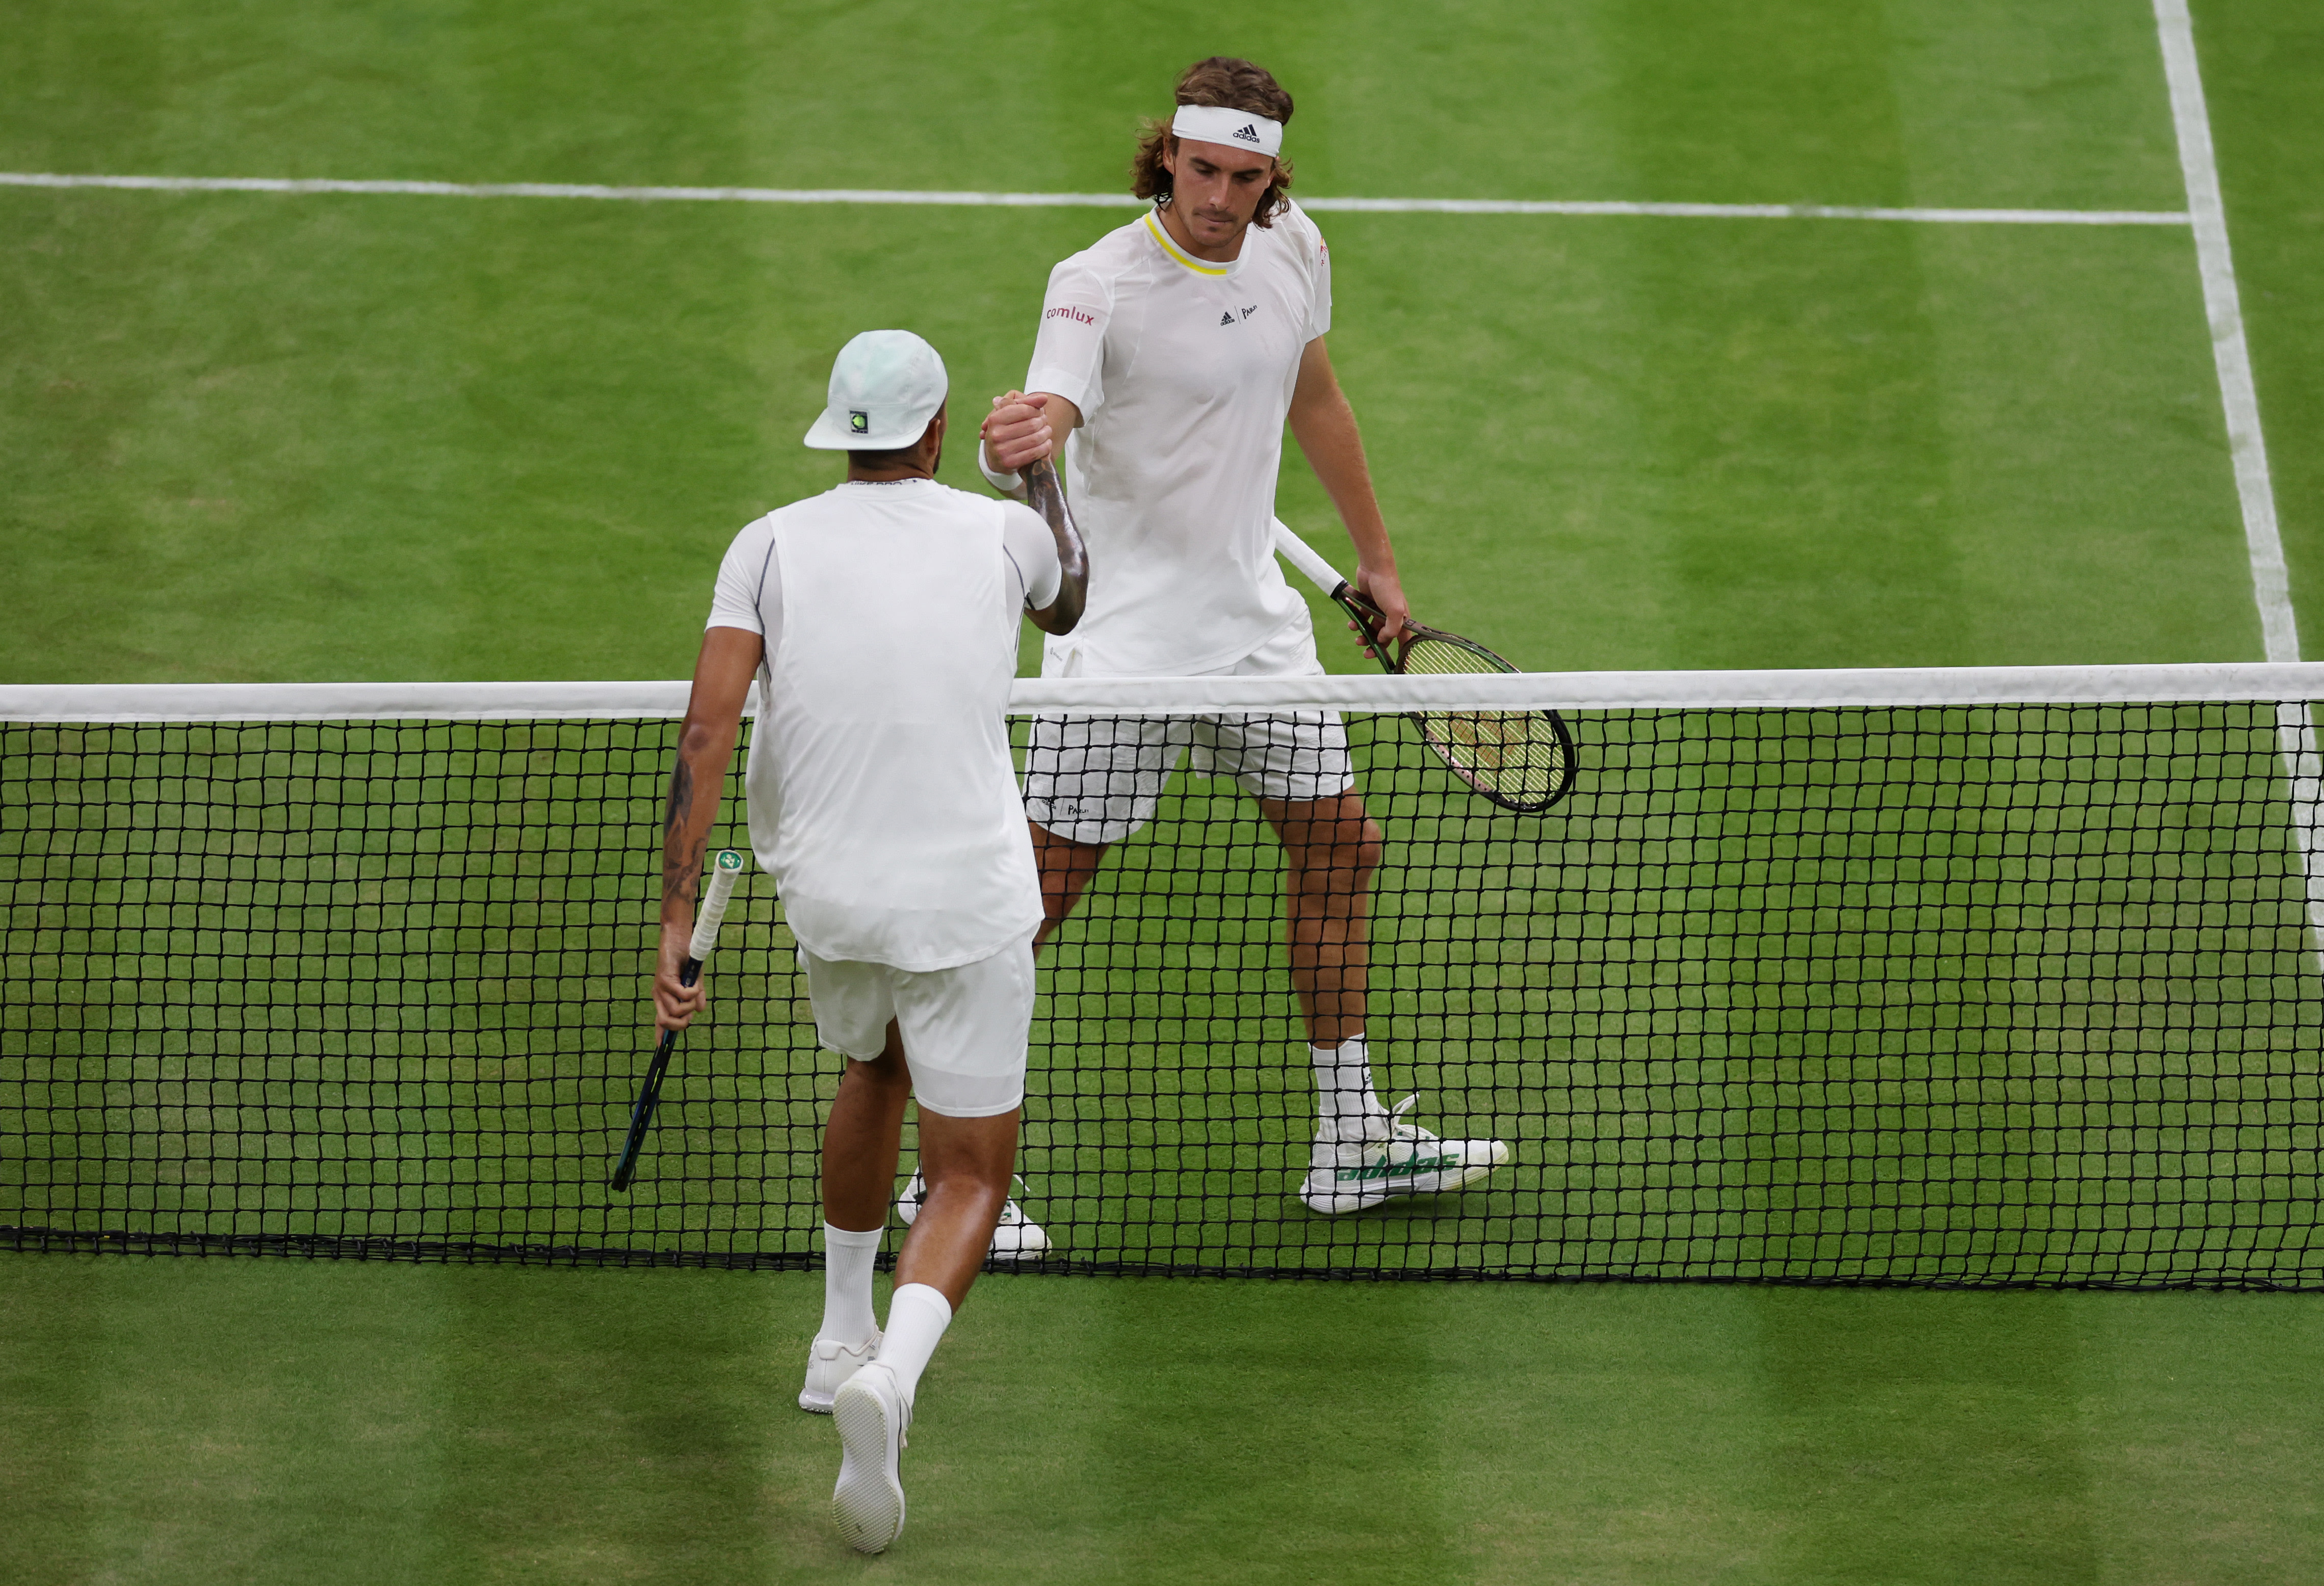 After a war on the court, Stefanos Tsitsipas and Nick Kyrgios engaged in a war of words at Wimbledon